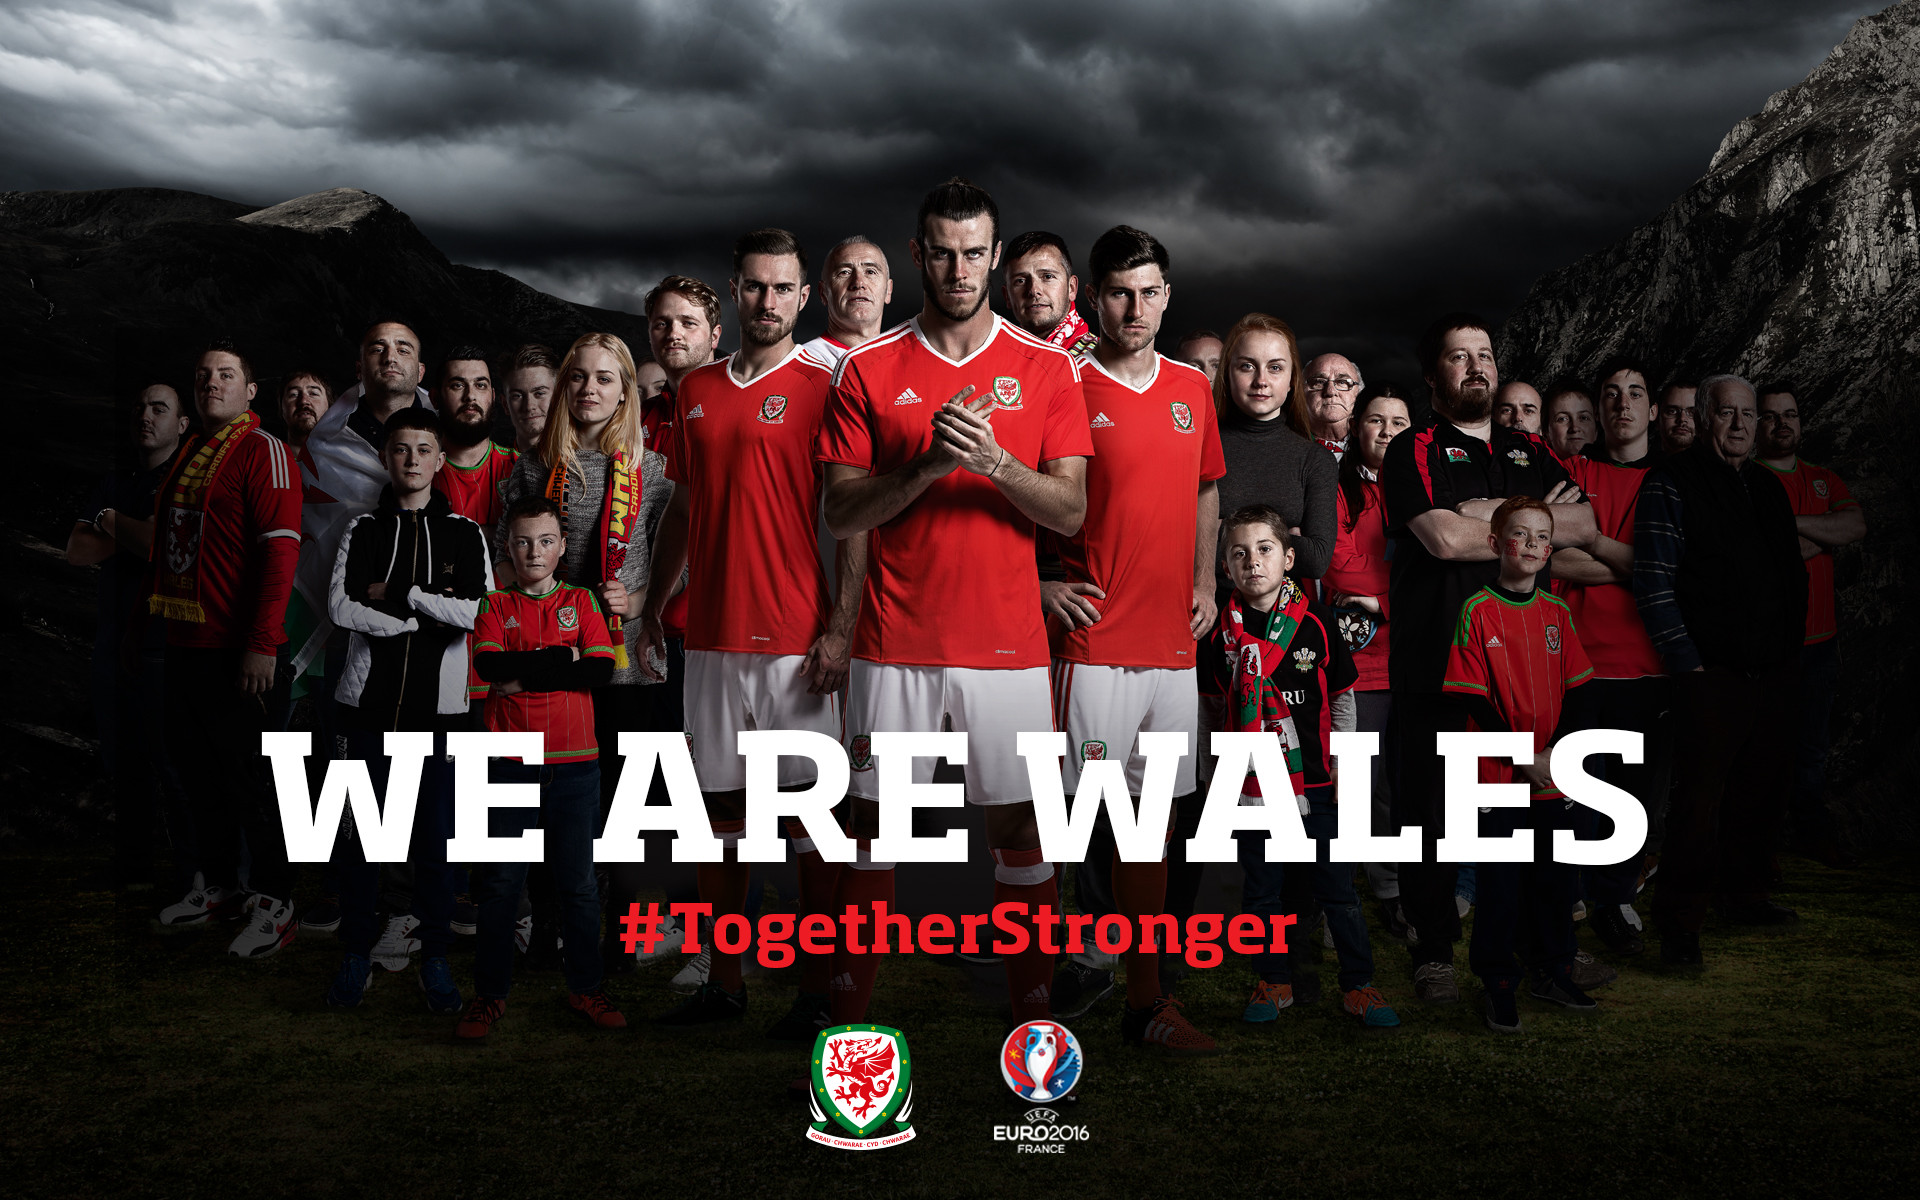 1920x1200 Wales Football Wallpaper for Euro 2016 Wales hd wallpaper for euro 2016